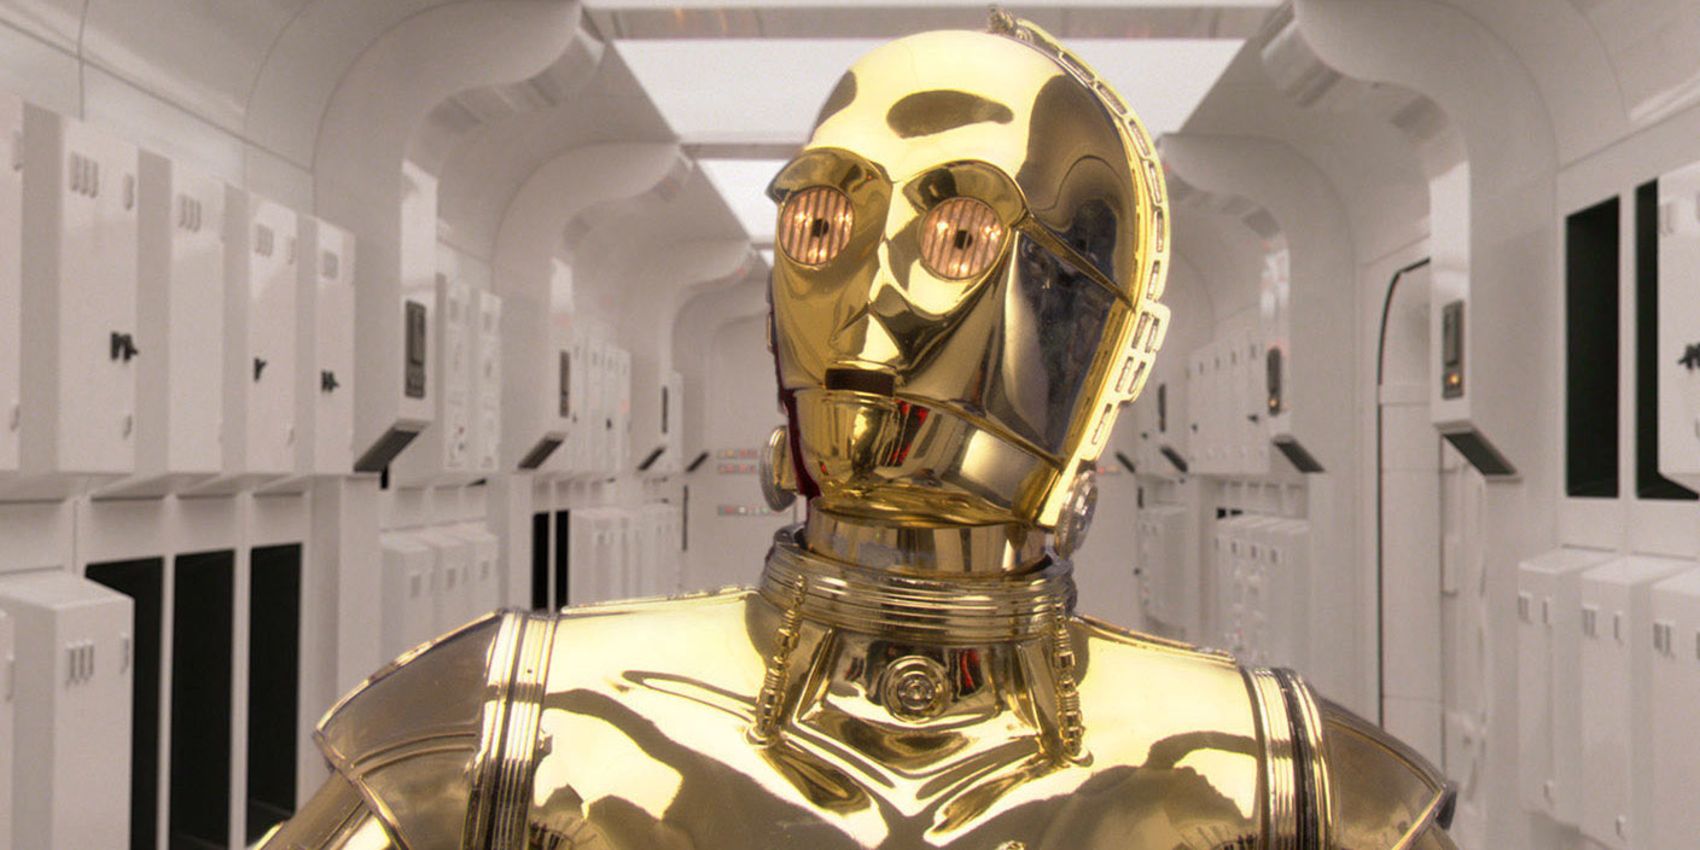 C-3PO Actor Anthony Daniels Auctions Iconic Star Wars Memorabilia Including Parts from Millennium Falcon